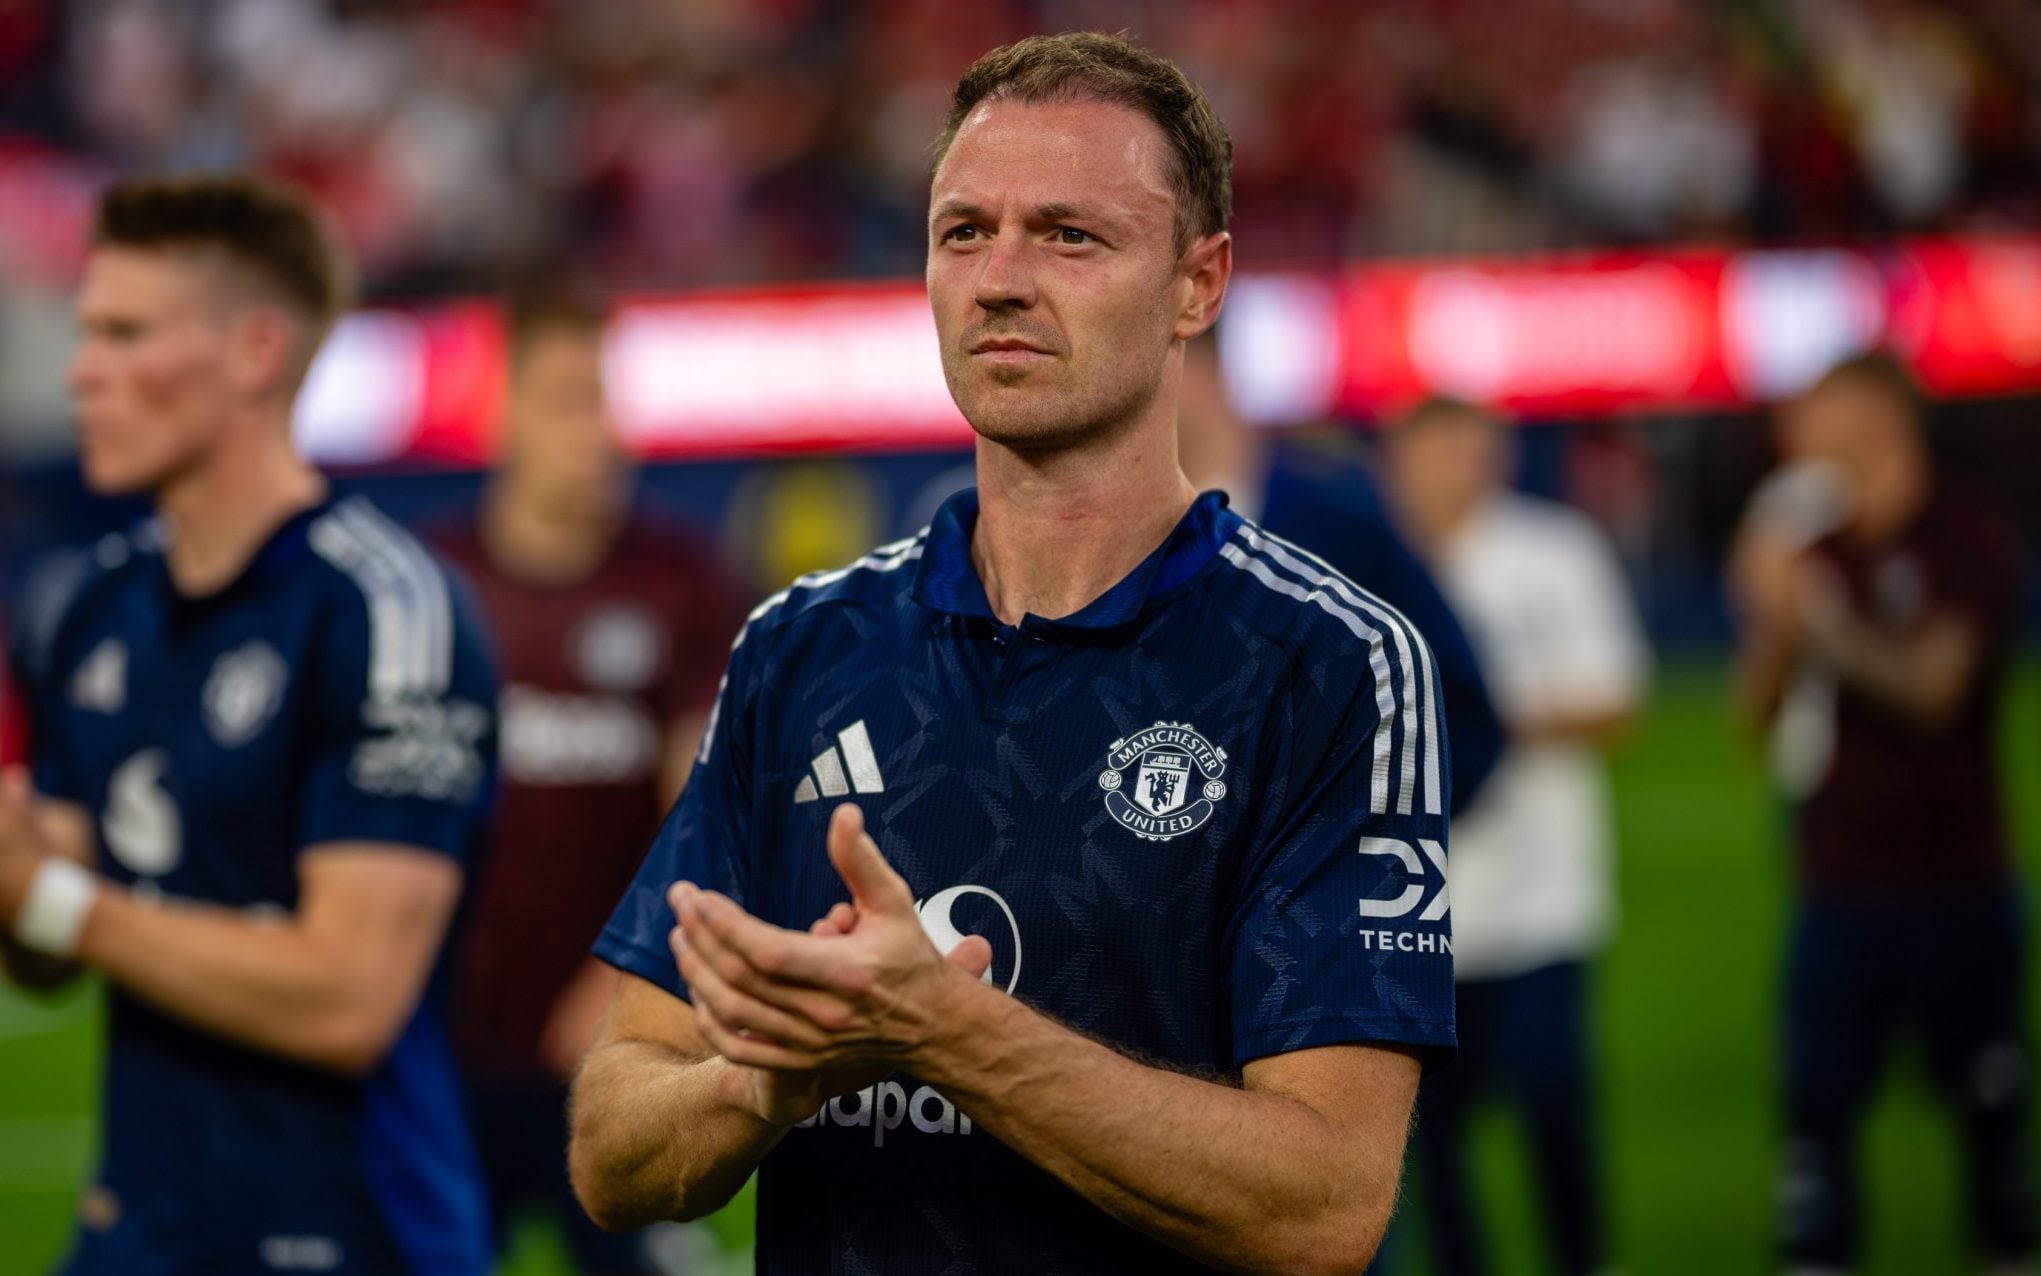 Jonny Evans on Manchester United job cuts: ‘It is difficult to see’